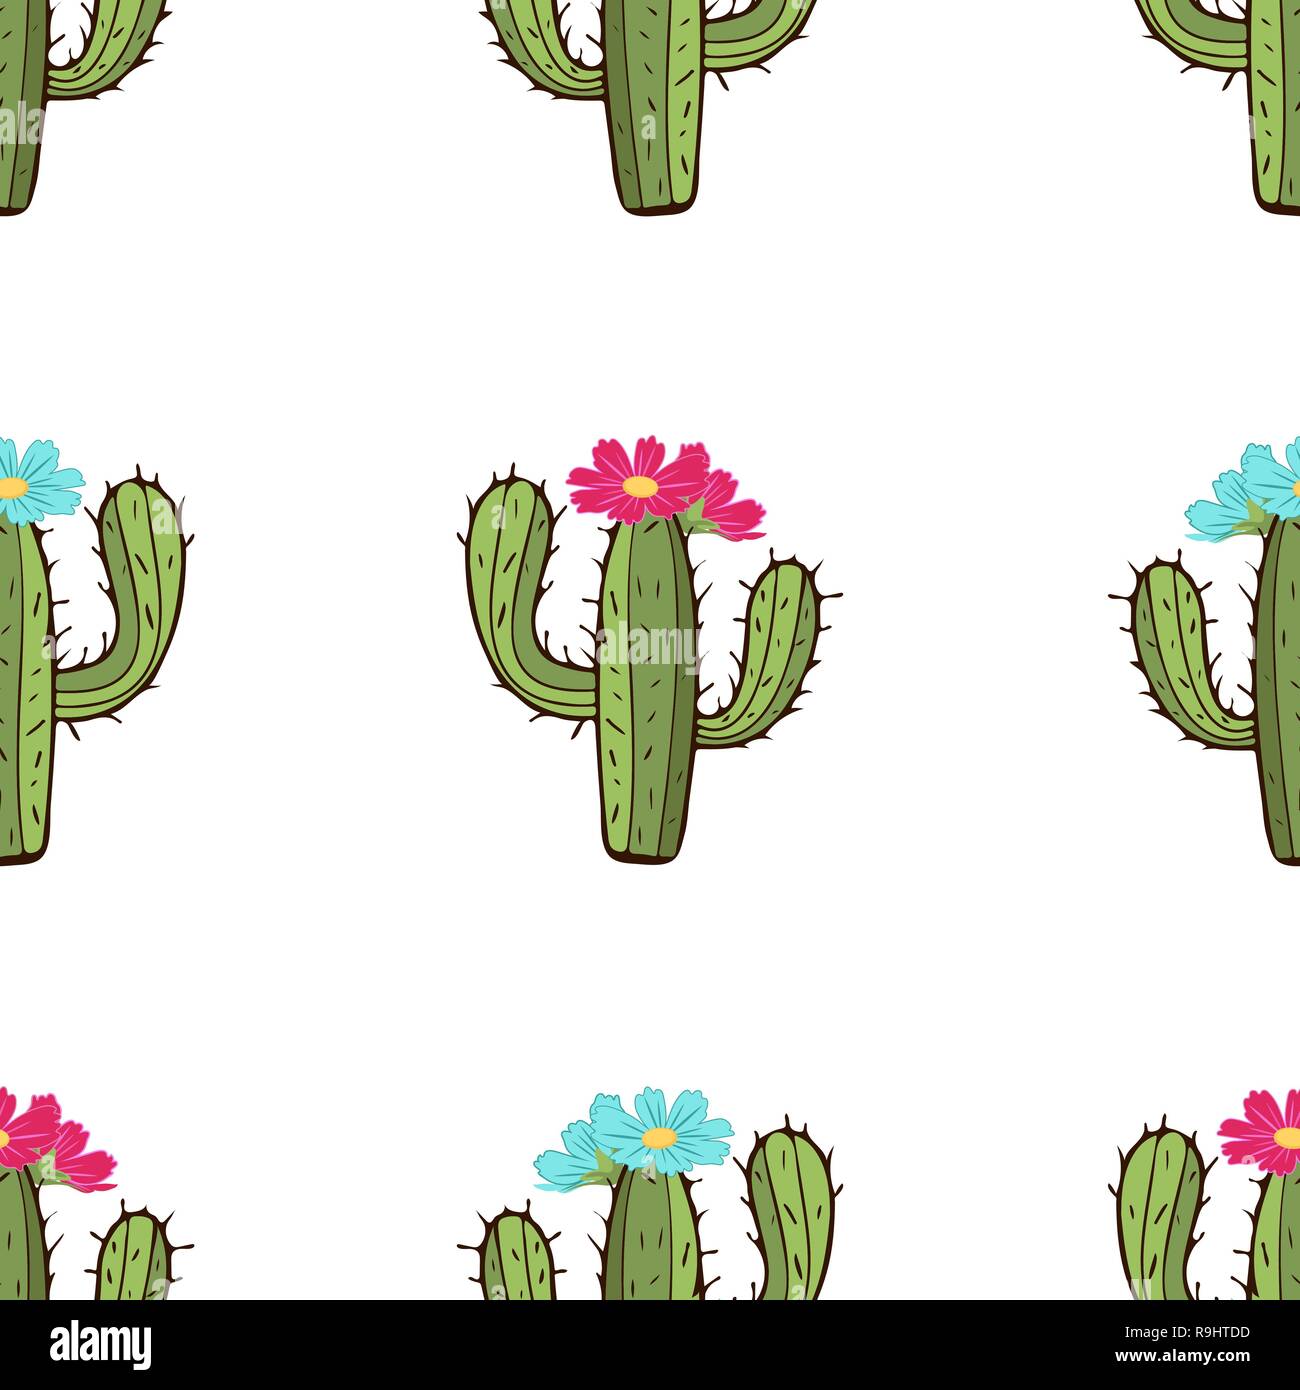 Blooming cactus seamless pattern, hand drawing, vector illustration. Painted green peyote with spikes and pink and blue flower buds on white backgroun Stock Vector